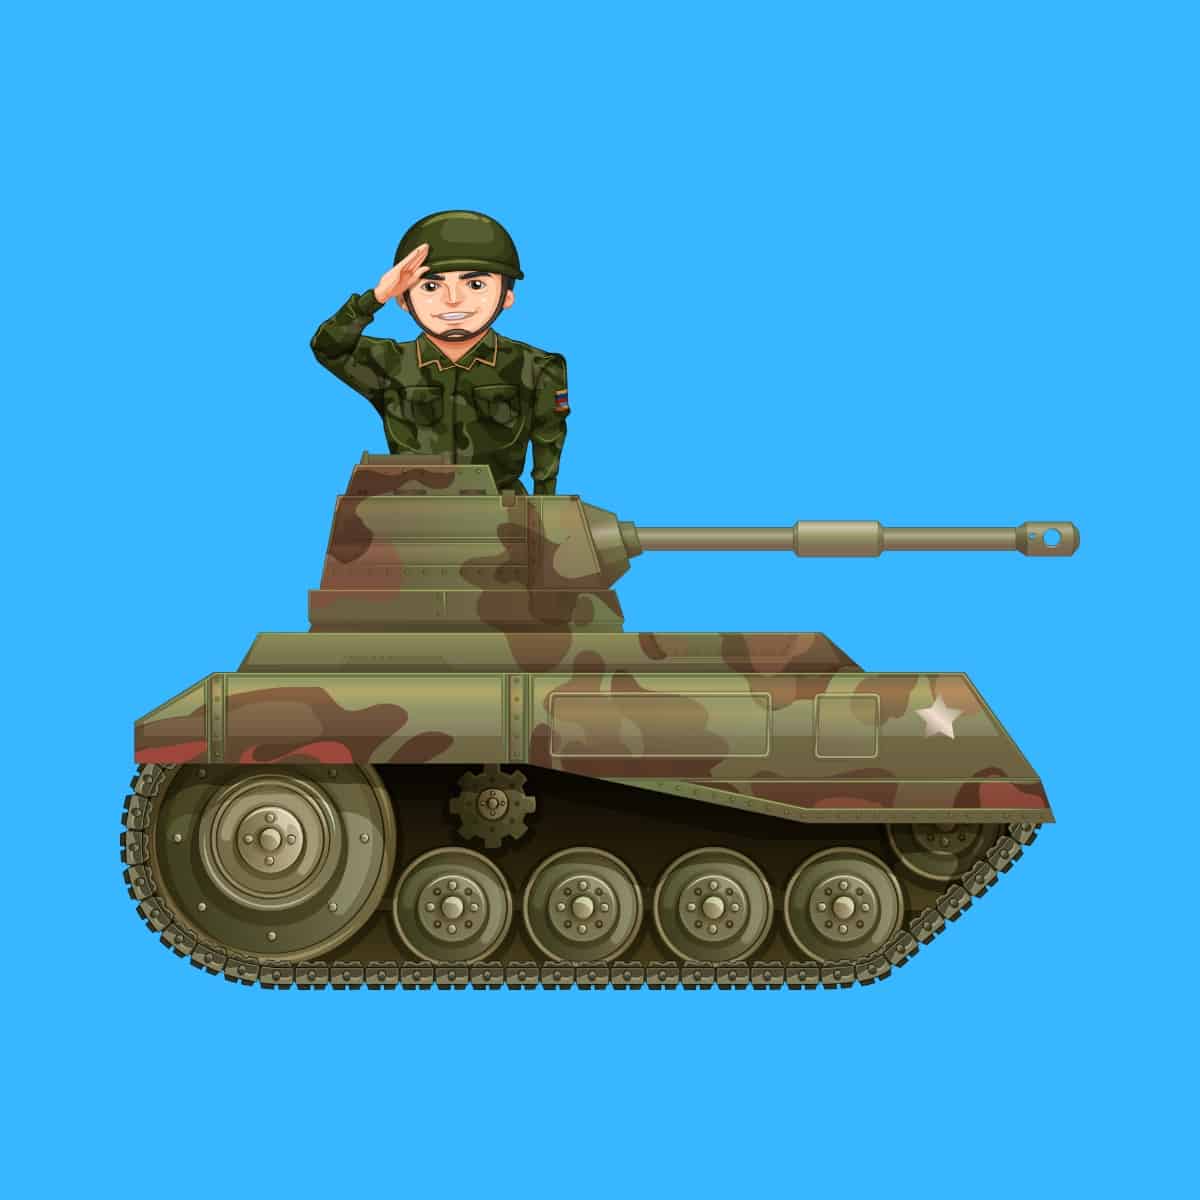 Cartoon graphic of an army man saluting on top of a tank on a blue background.